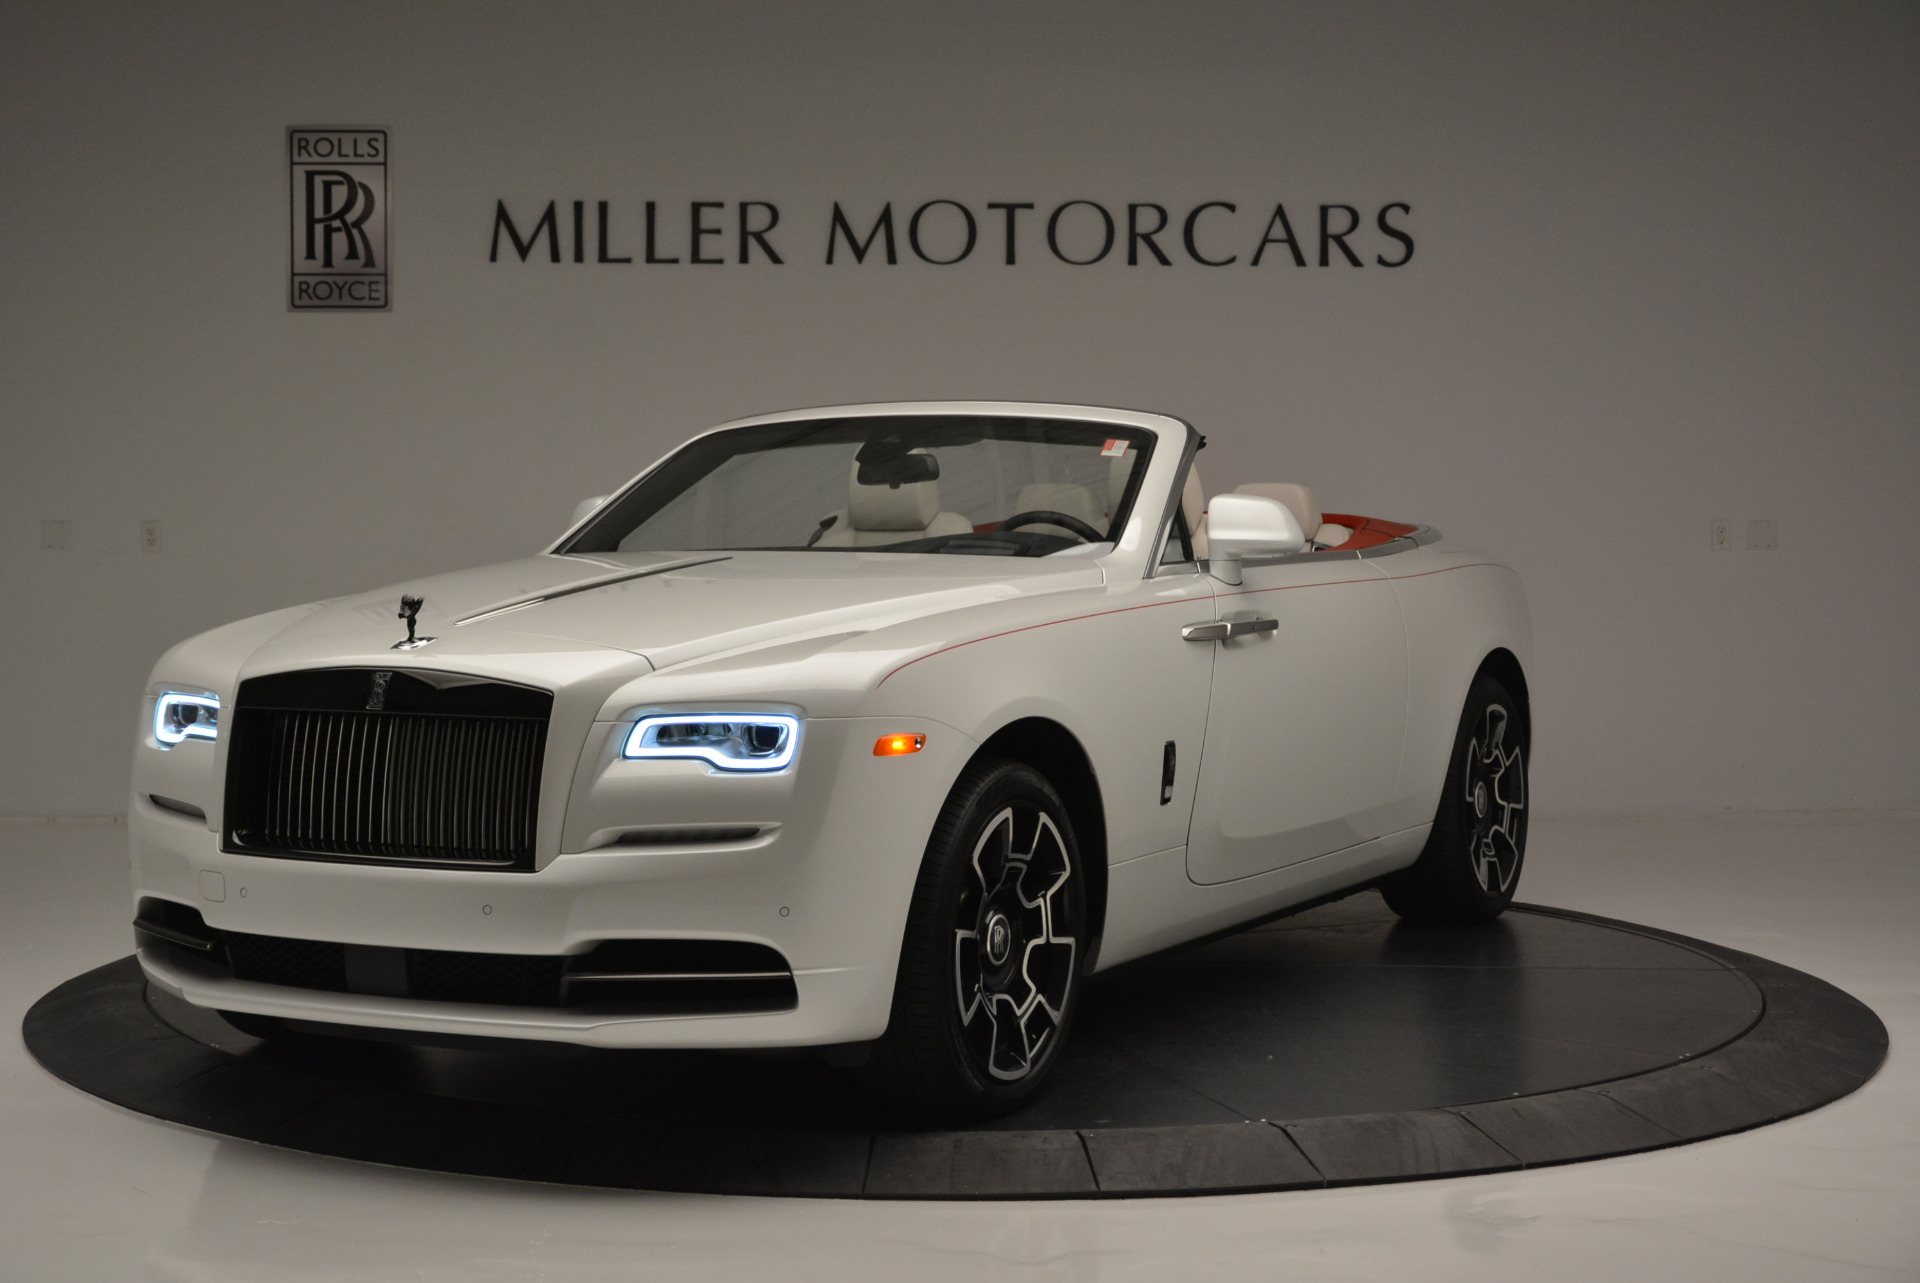 Used 2018 Rolls-Royce Dawn Black Badge for sale Sold at Aston Martin of Greenwich in Greenwich CT 06830 1